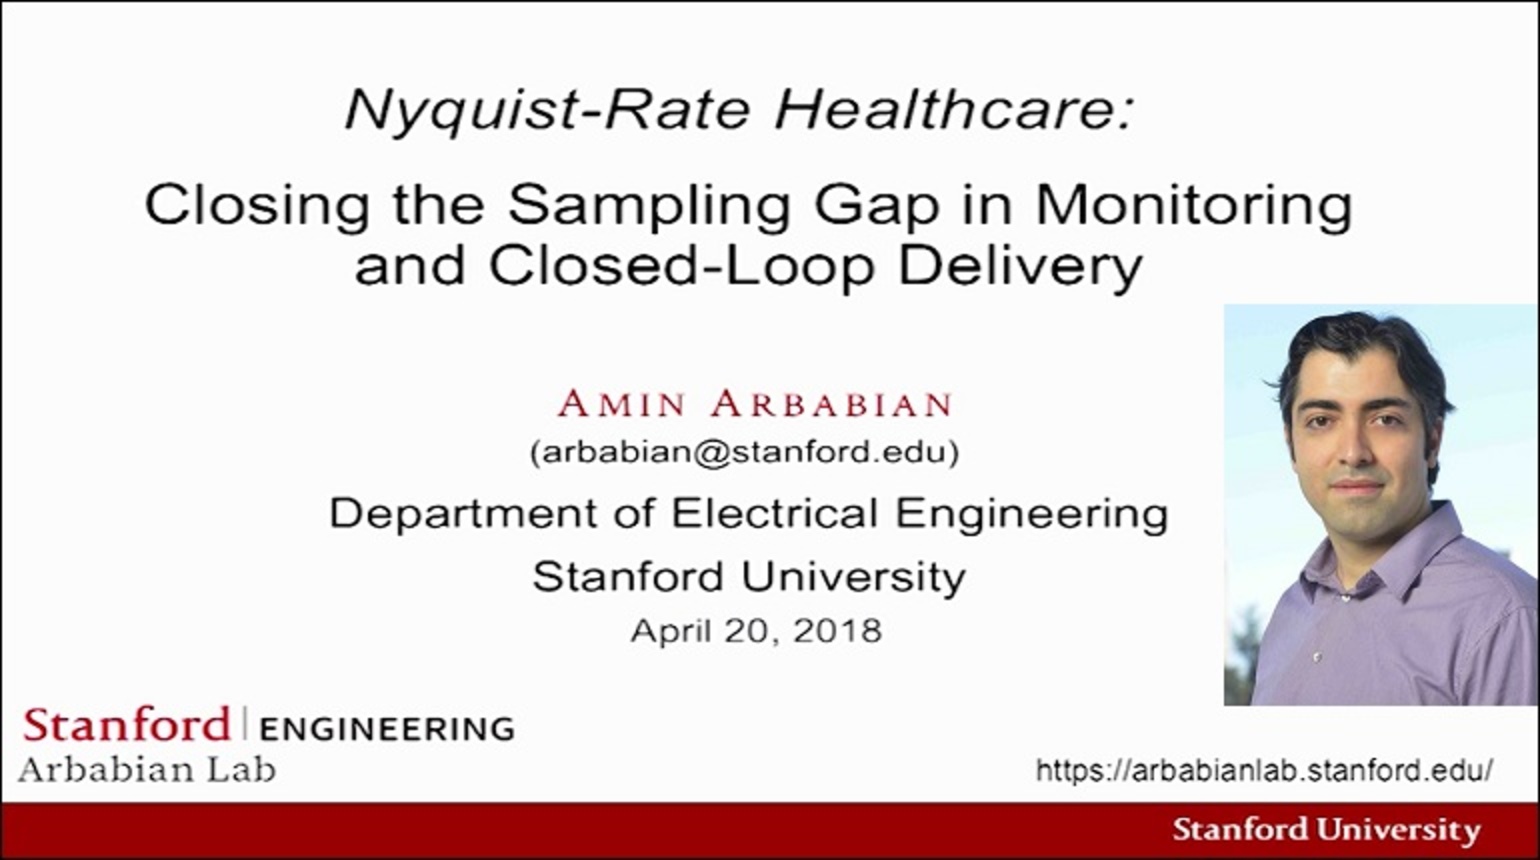 Nyquist-Rate Healthcare: Silicon Systems to Close the Sub-Sampling Gap in Health Monitoring? Video